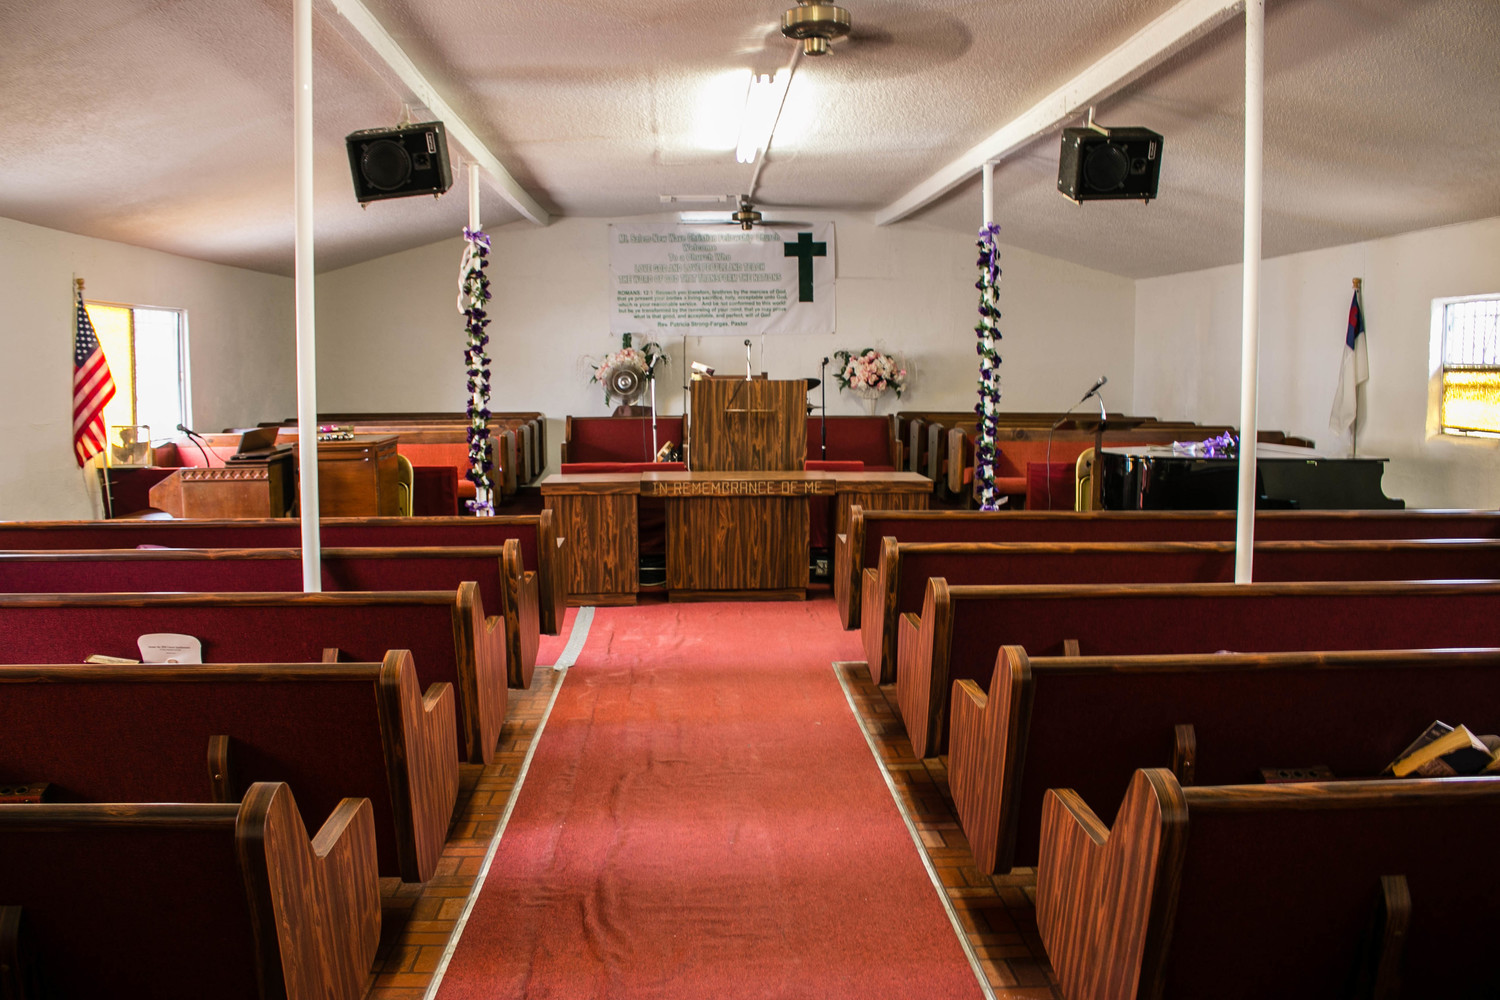 An inside view of a church containing brown colored wooden benches and a red carpet